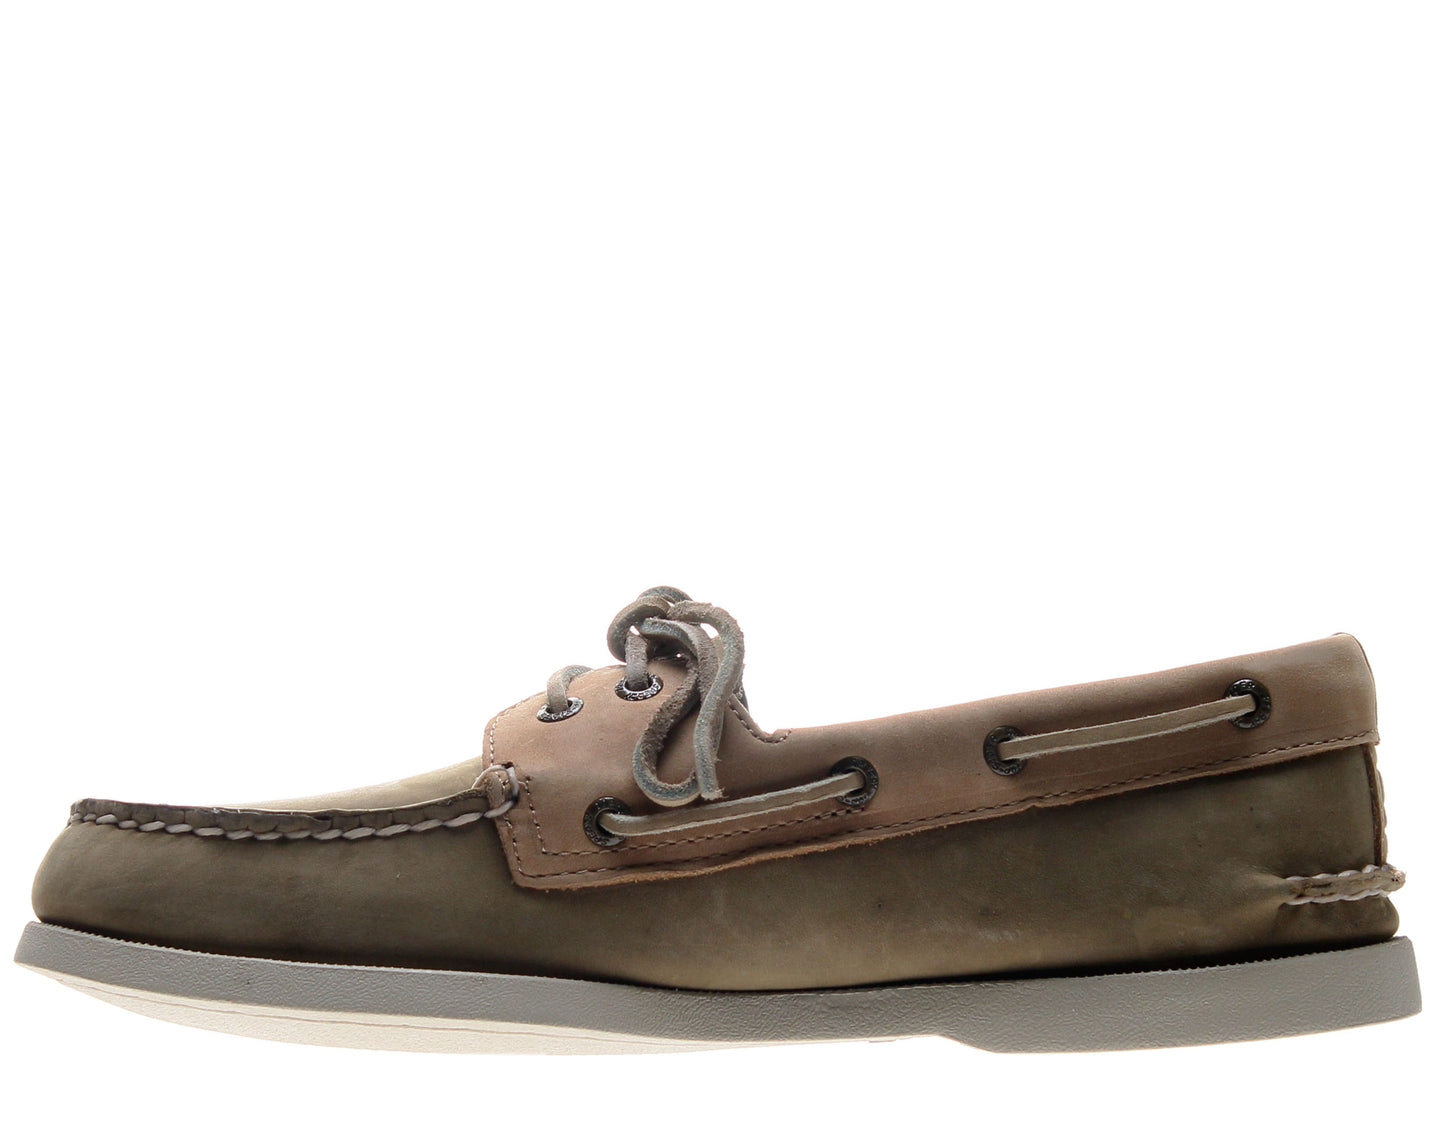 Sperry Top Sider Authentic Original Men's 2-Eye Boat Shoes